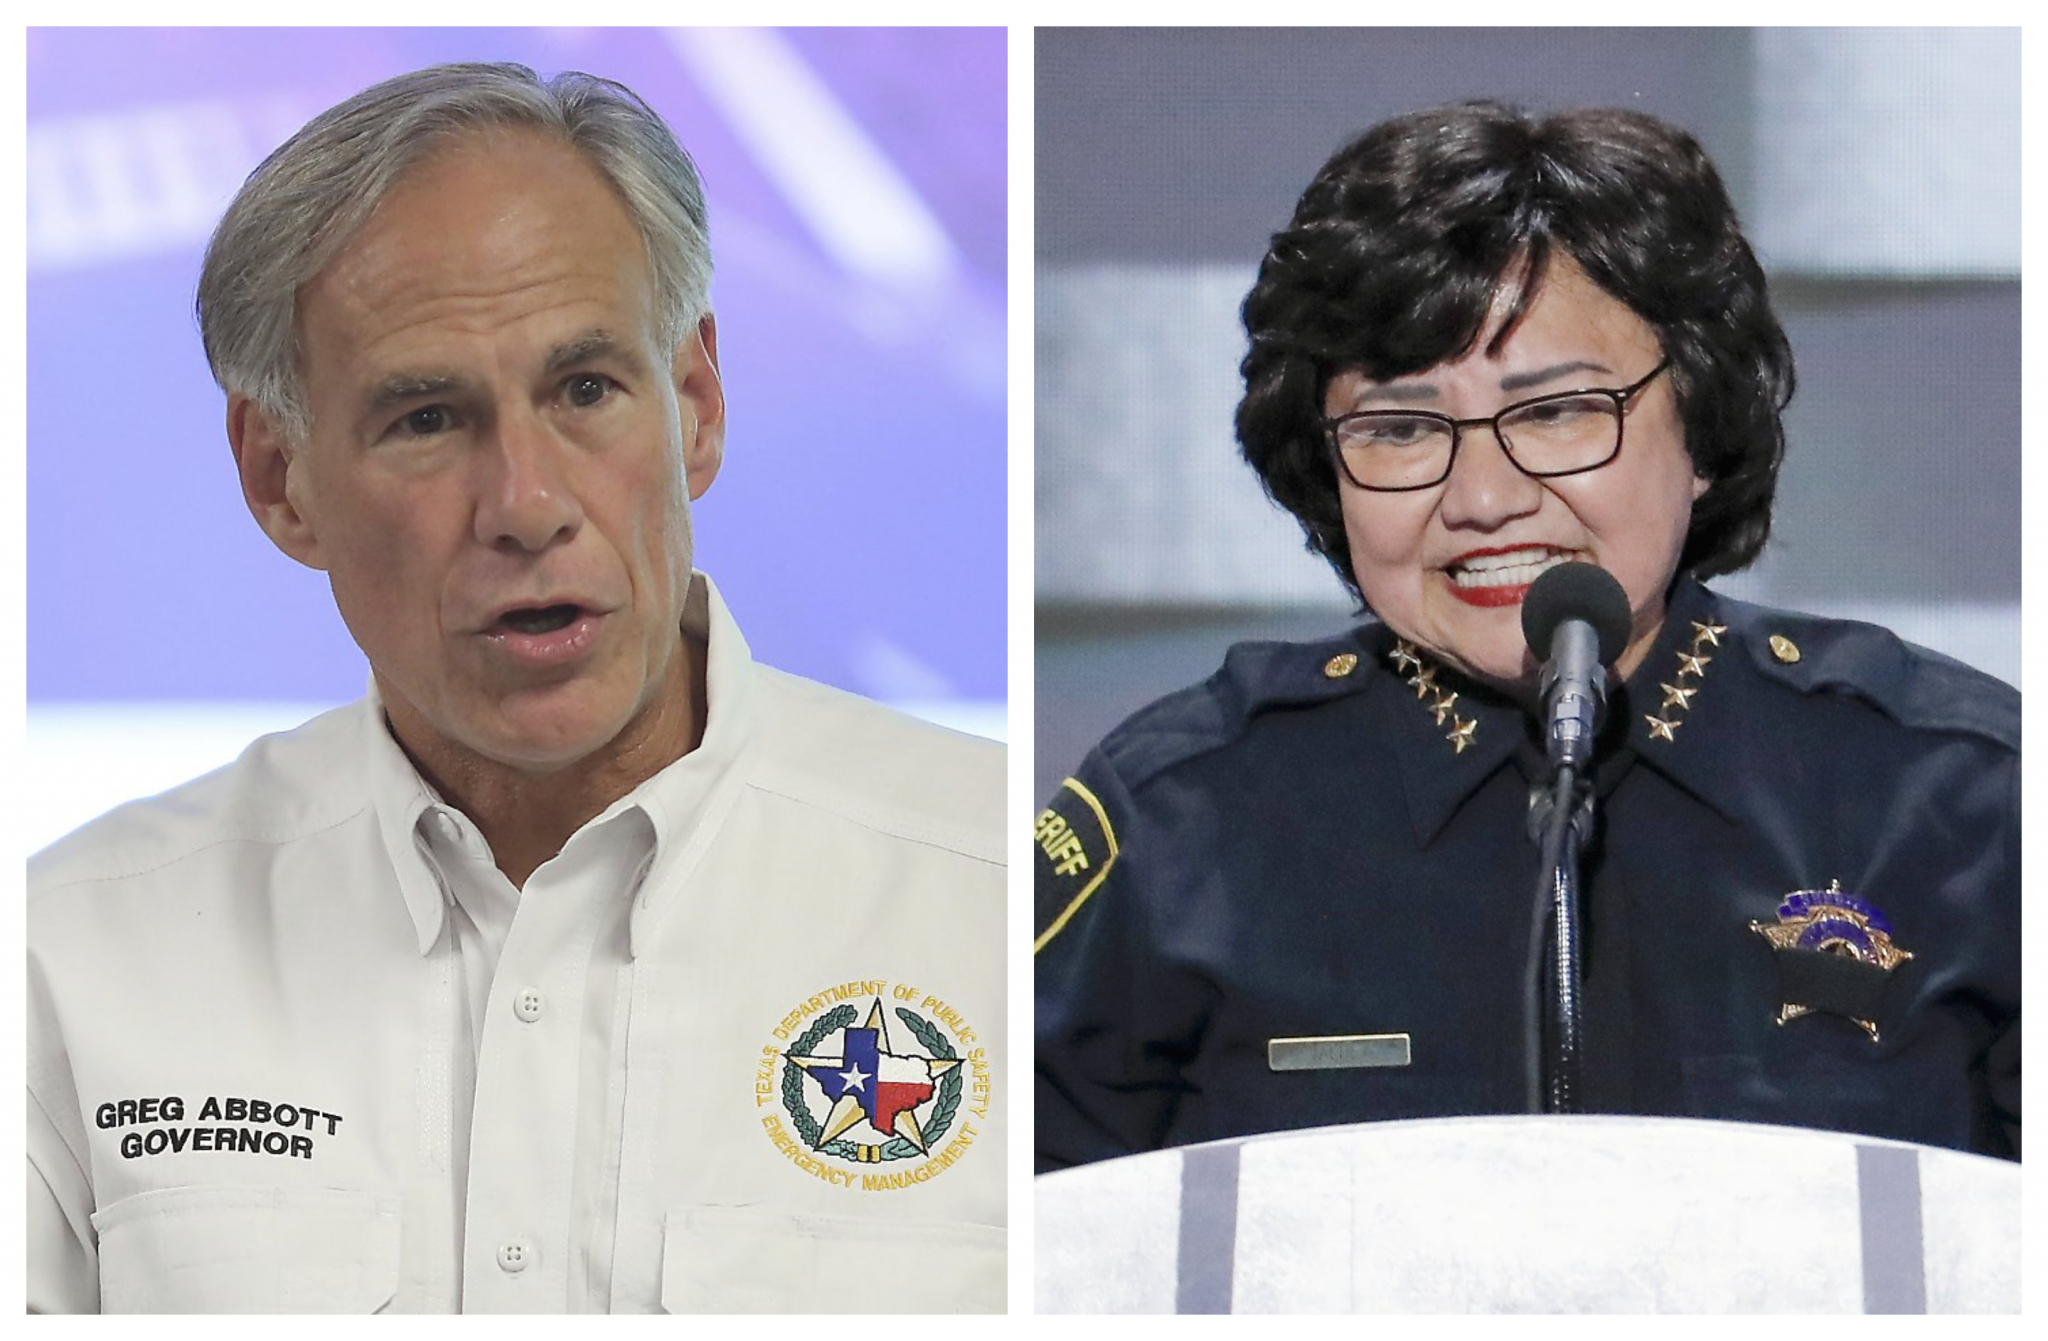 Here are the candidates running for governor in Texas in November